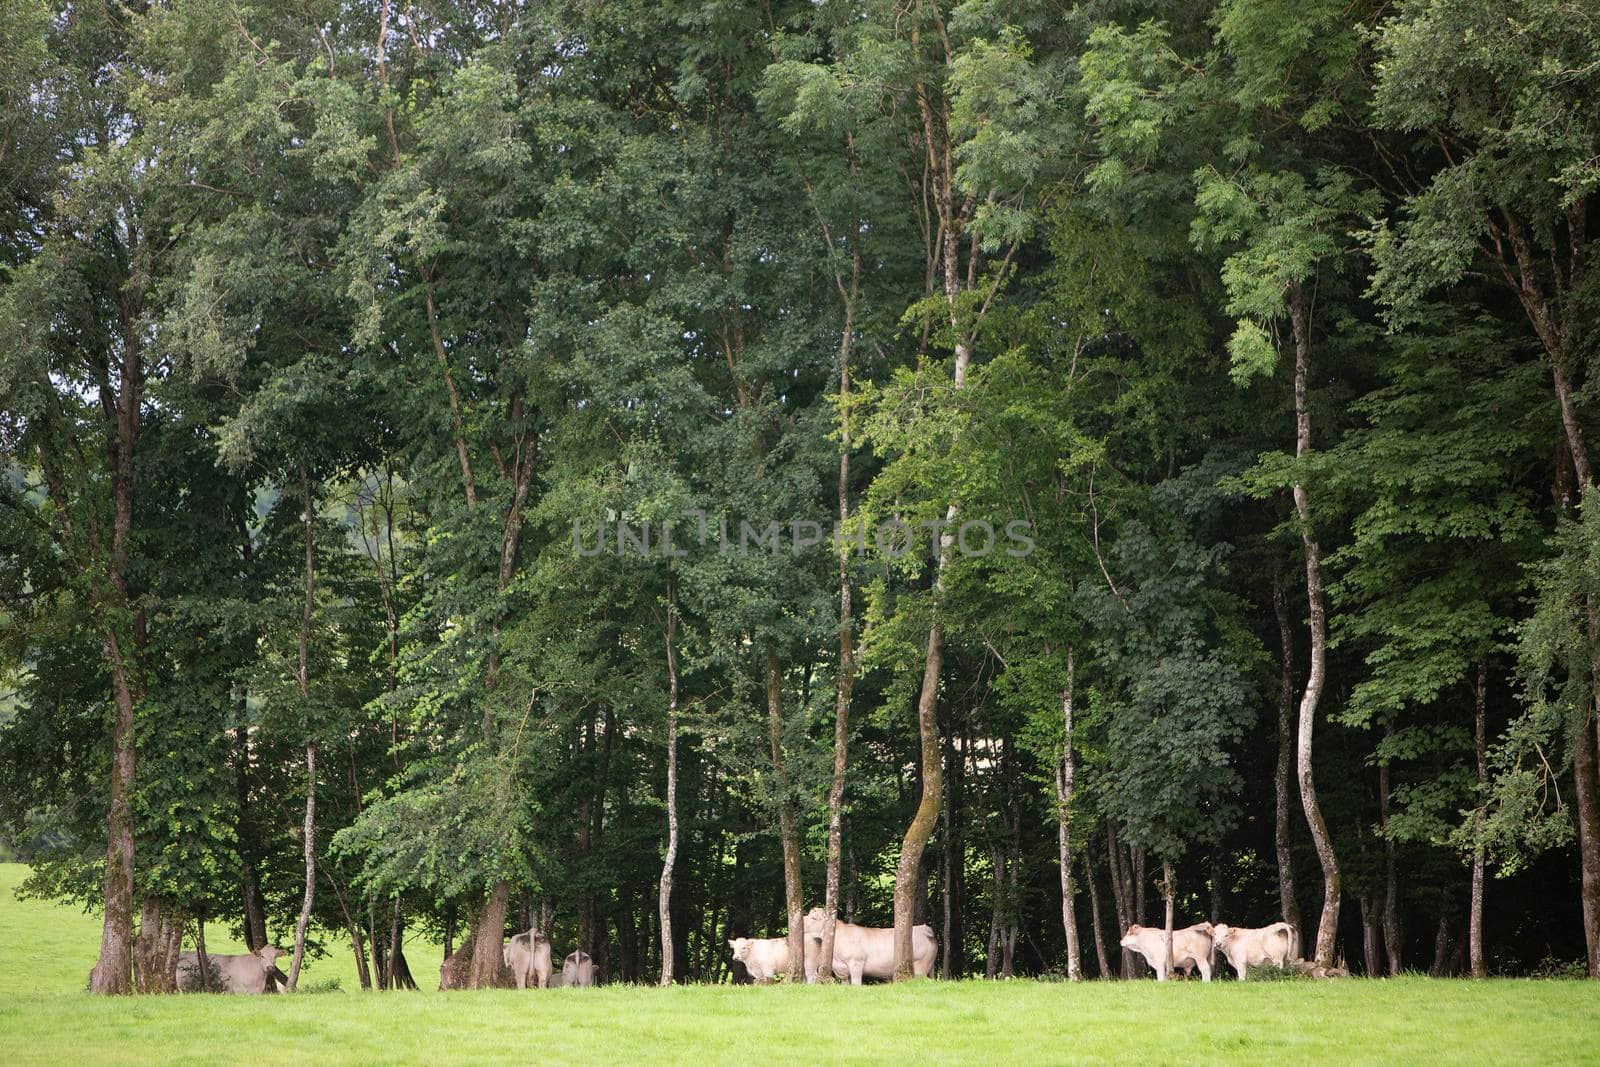 calves and white cows between trees of forest in french countryside of ardennes region